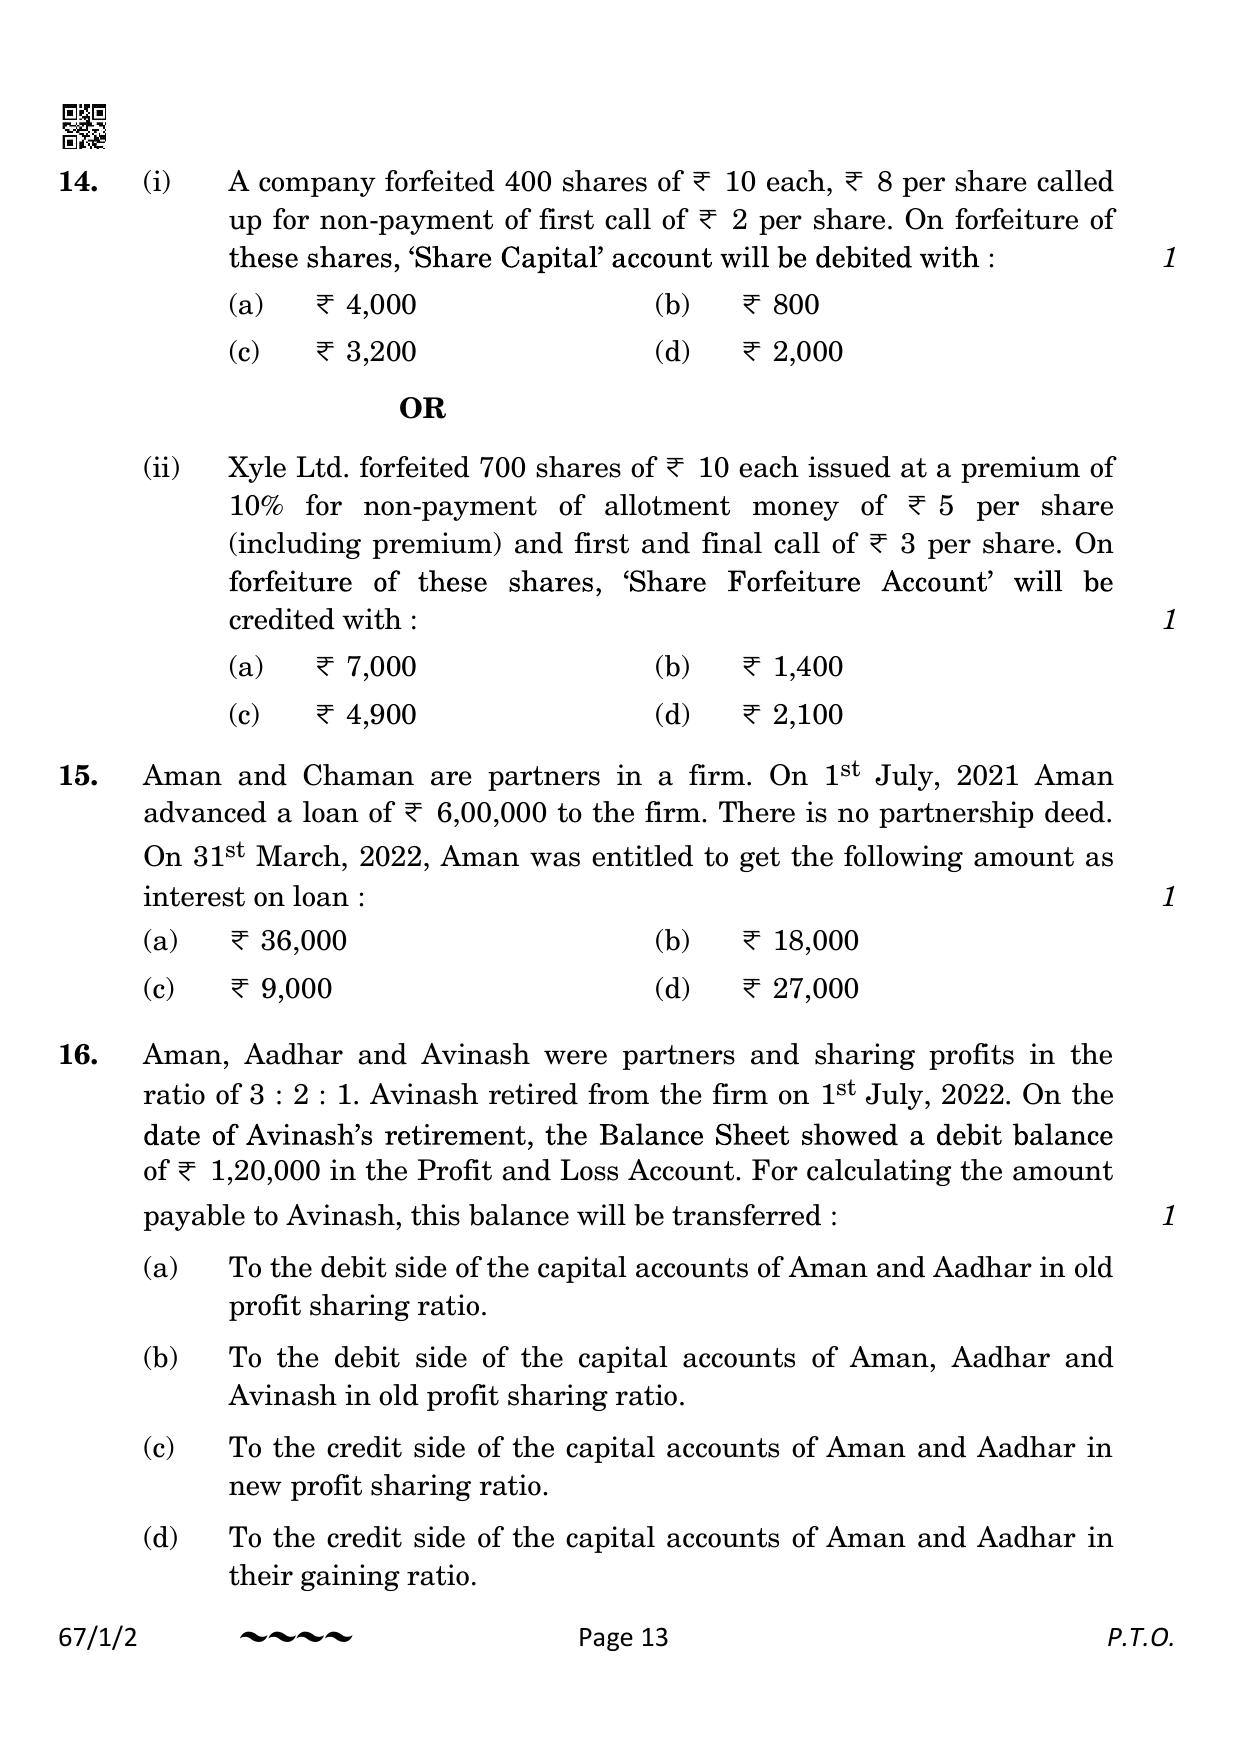 CBSE Class 12 67-1-2 Accountancy 2023 Question Paper - Page 13